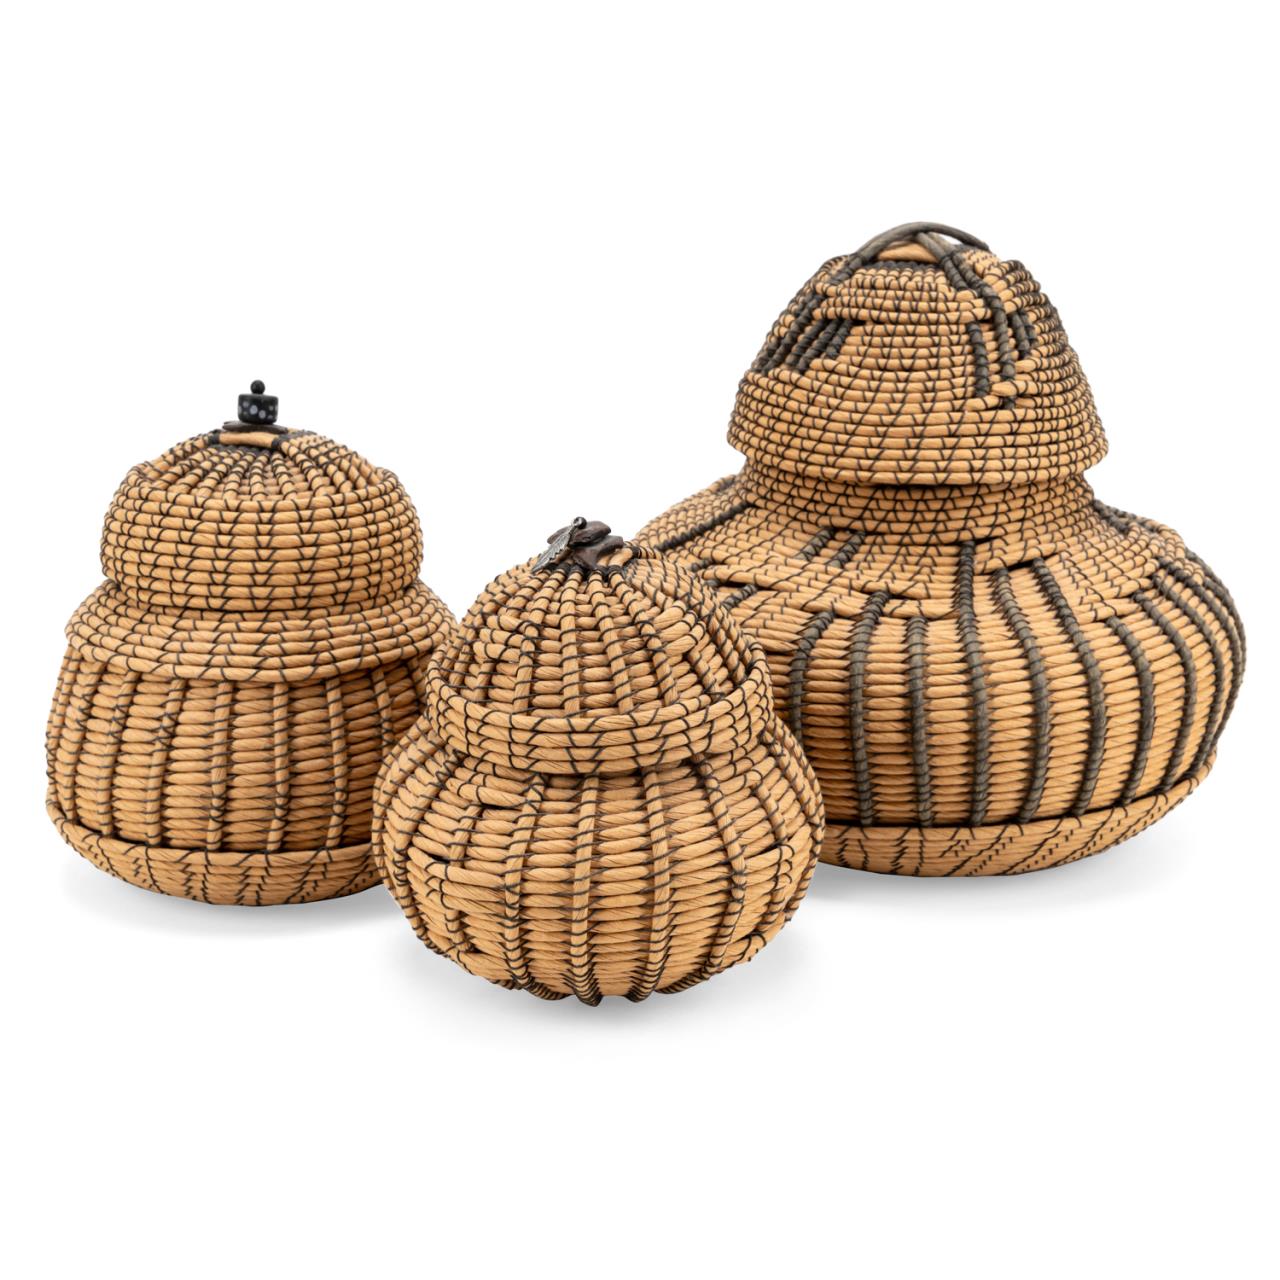 THREE TWISTED CORD WOVEN BASKETS,